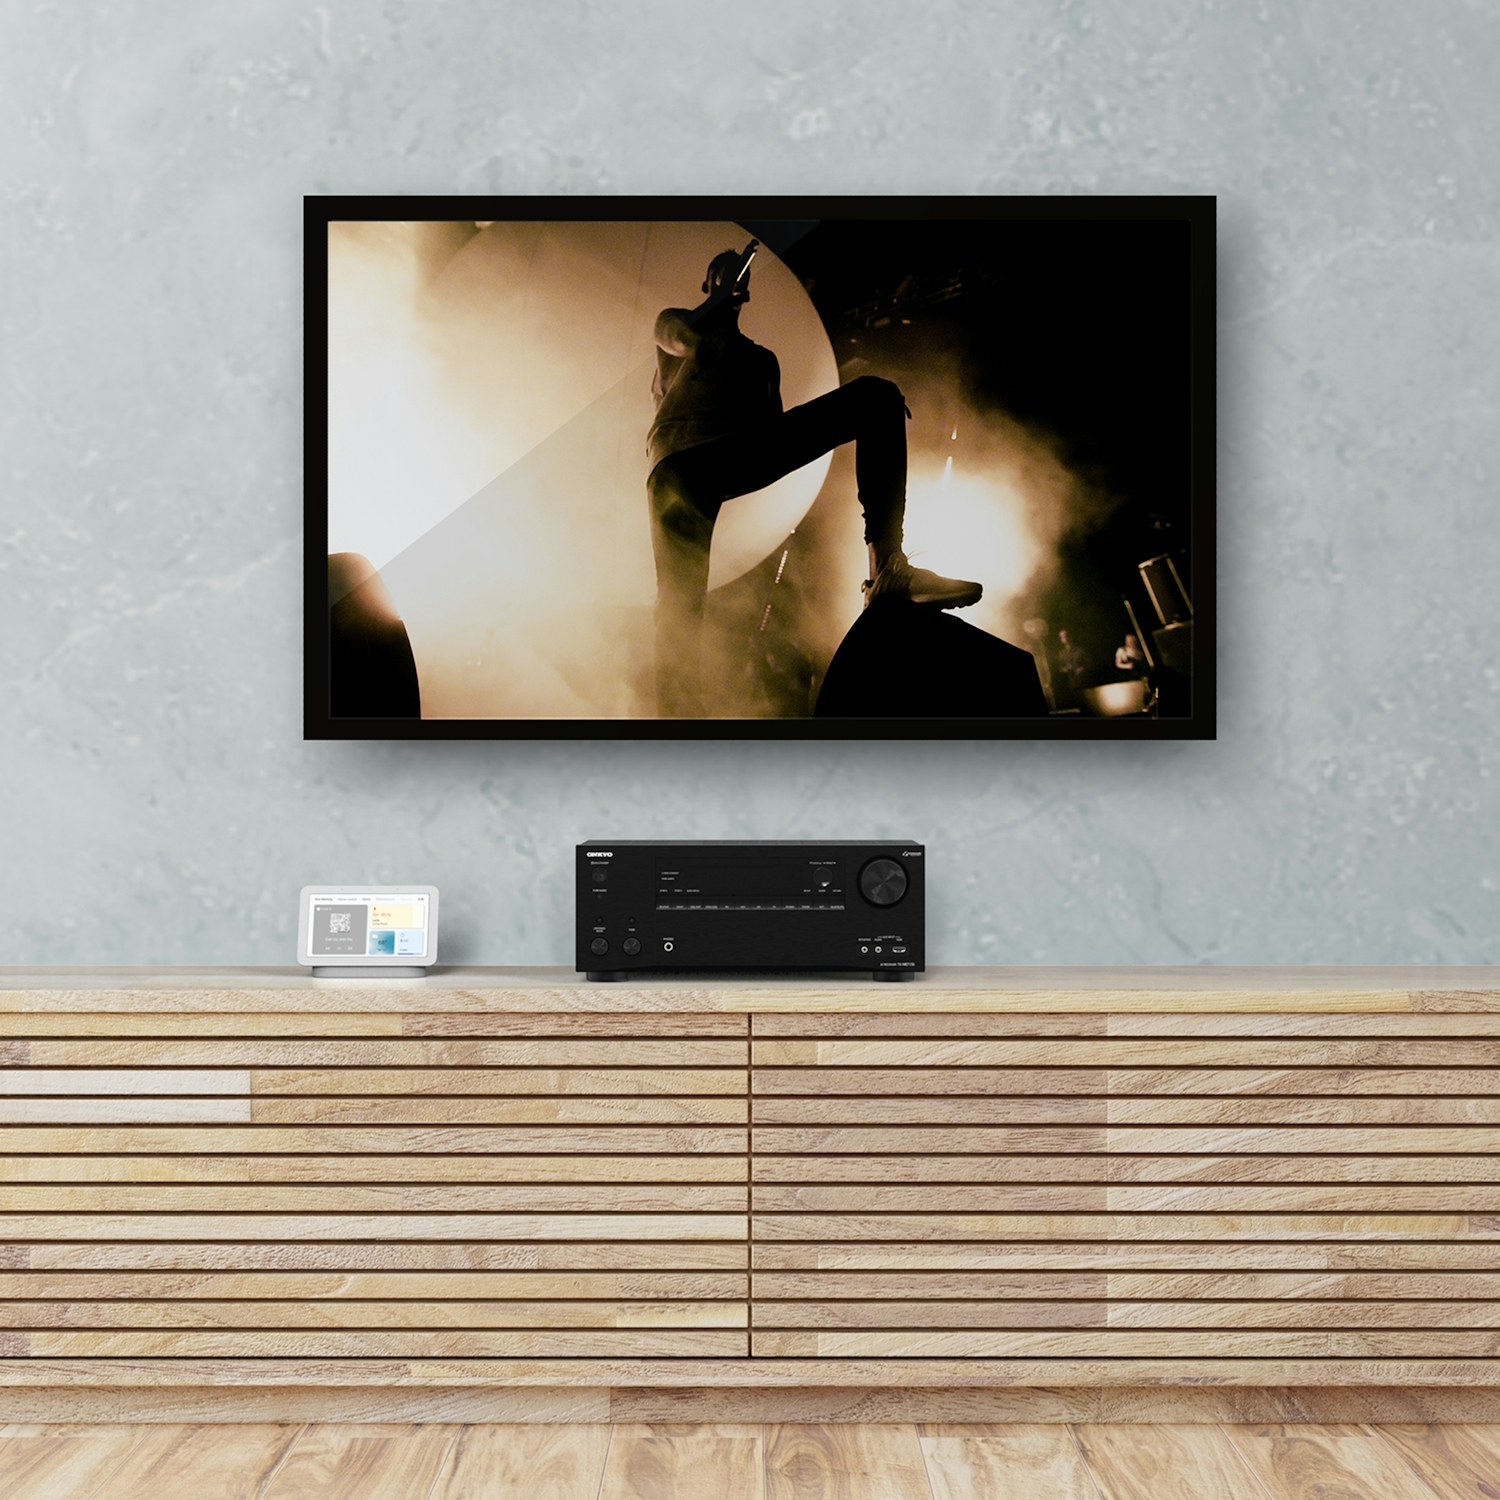 Onkyo 7100 RP8060 FA Beside TV Showing Concert MOBILE